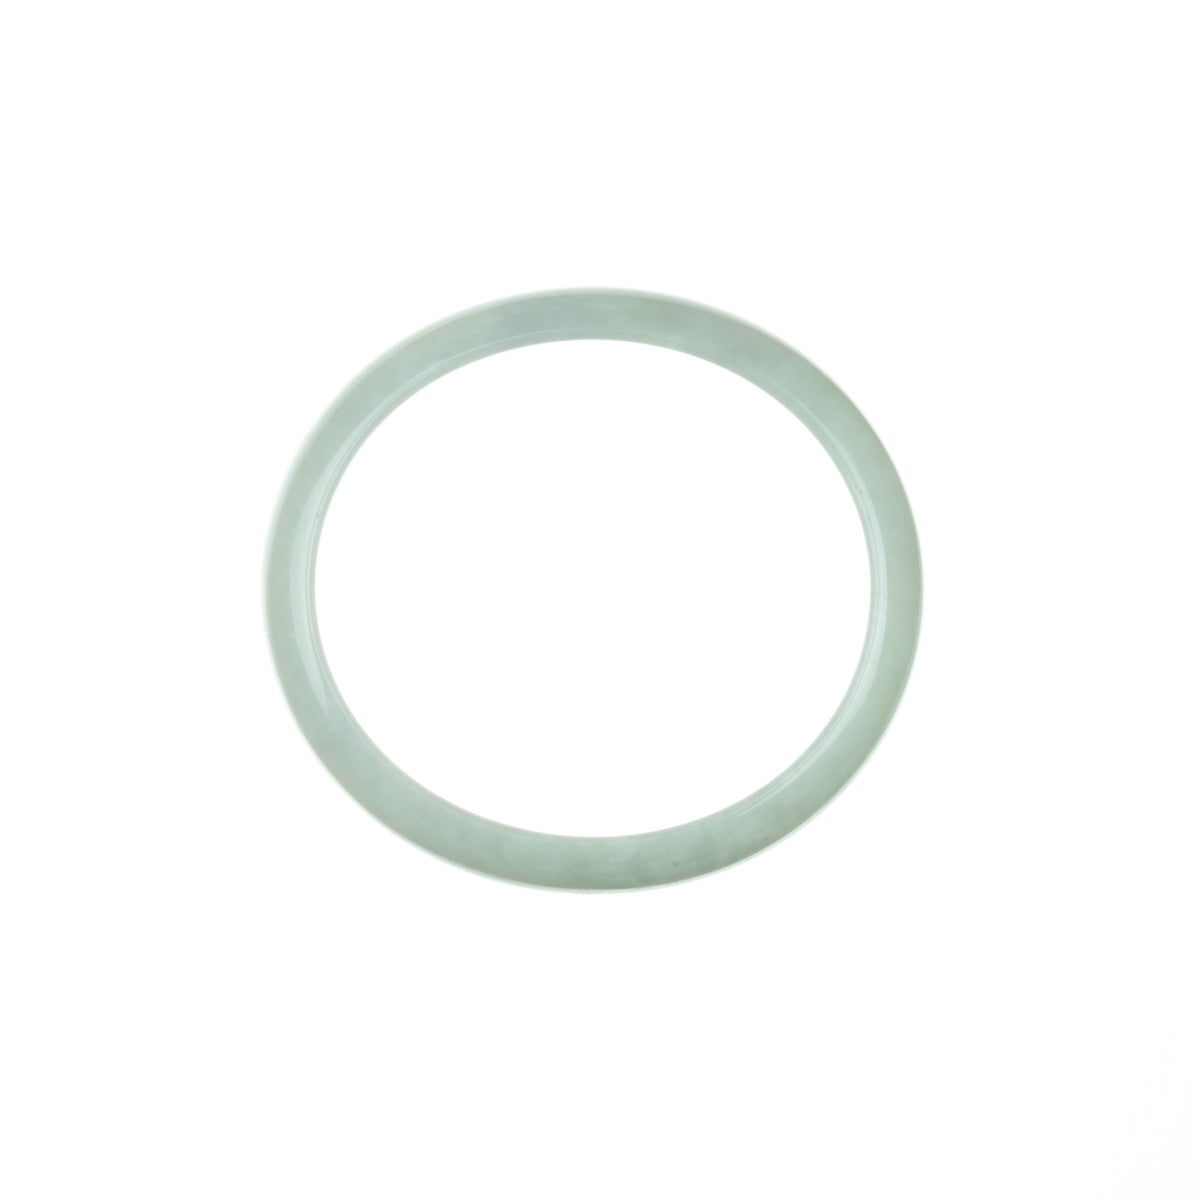 Certified Natural Very plae green Jadeite Bangle - 56mm Oval